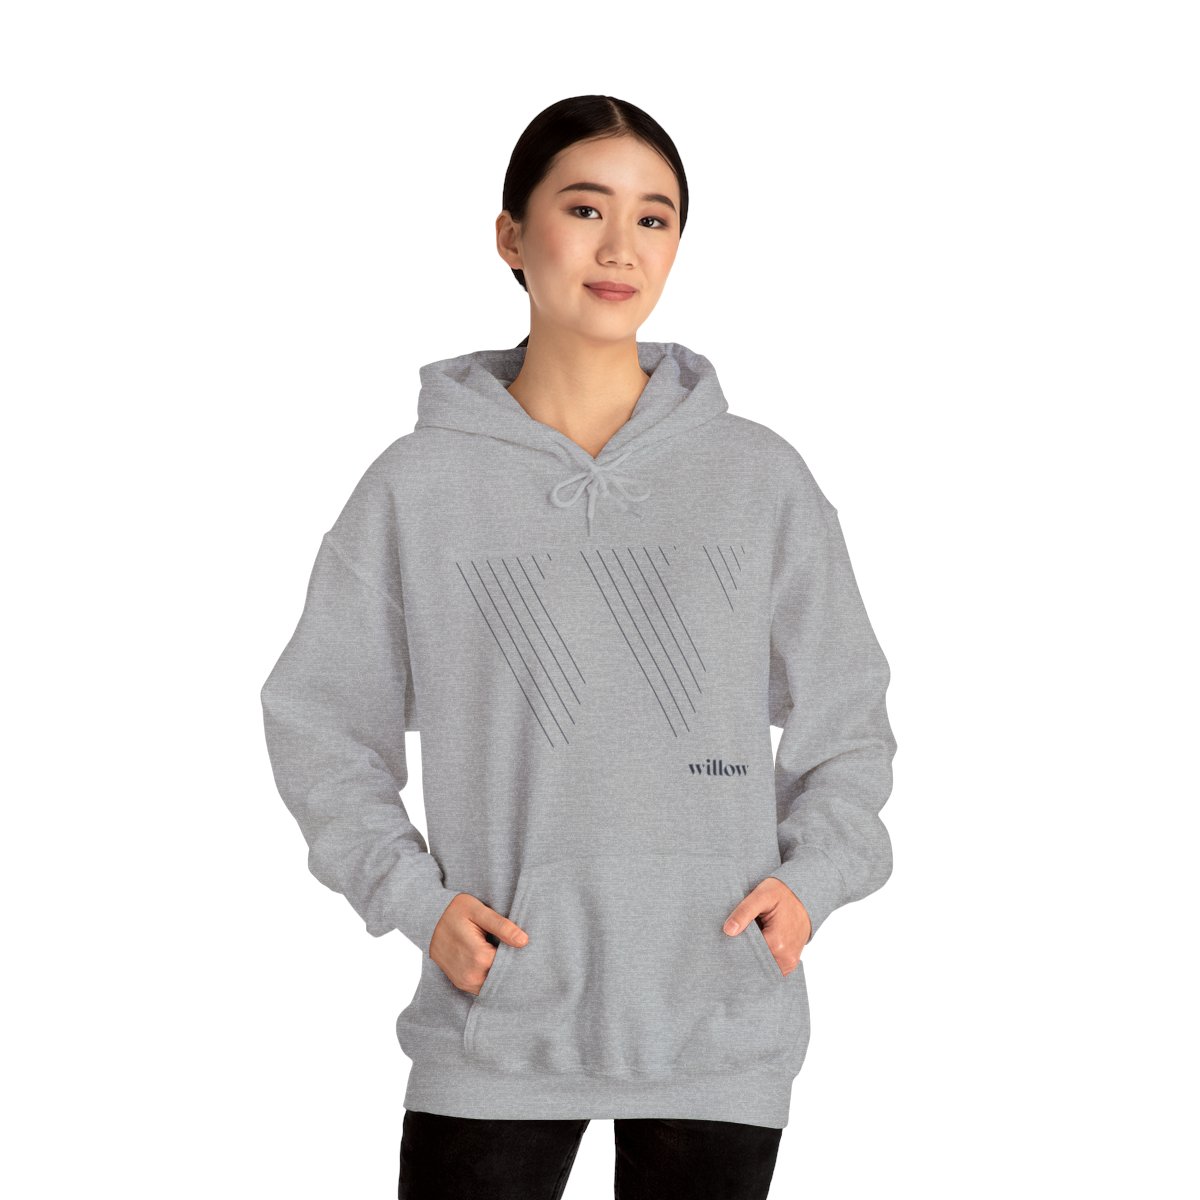 Lined W Hoodie product thumbnail image